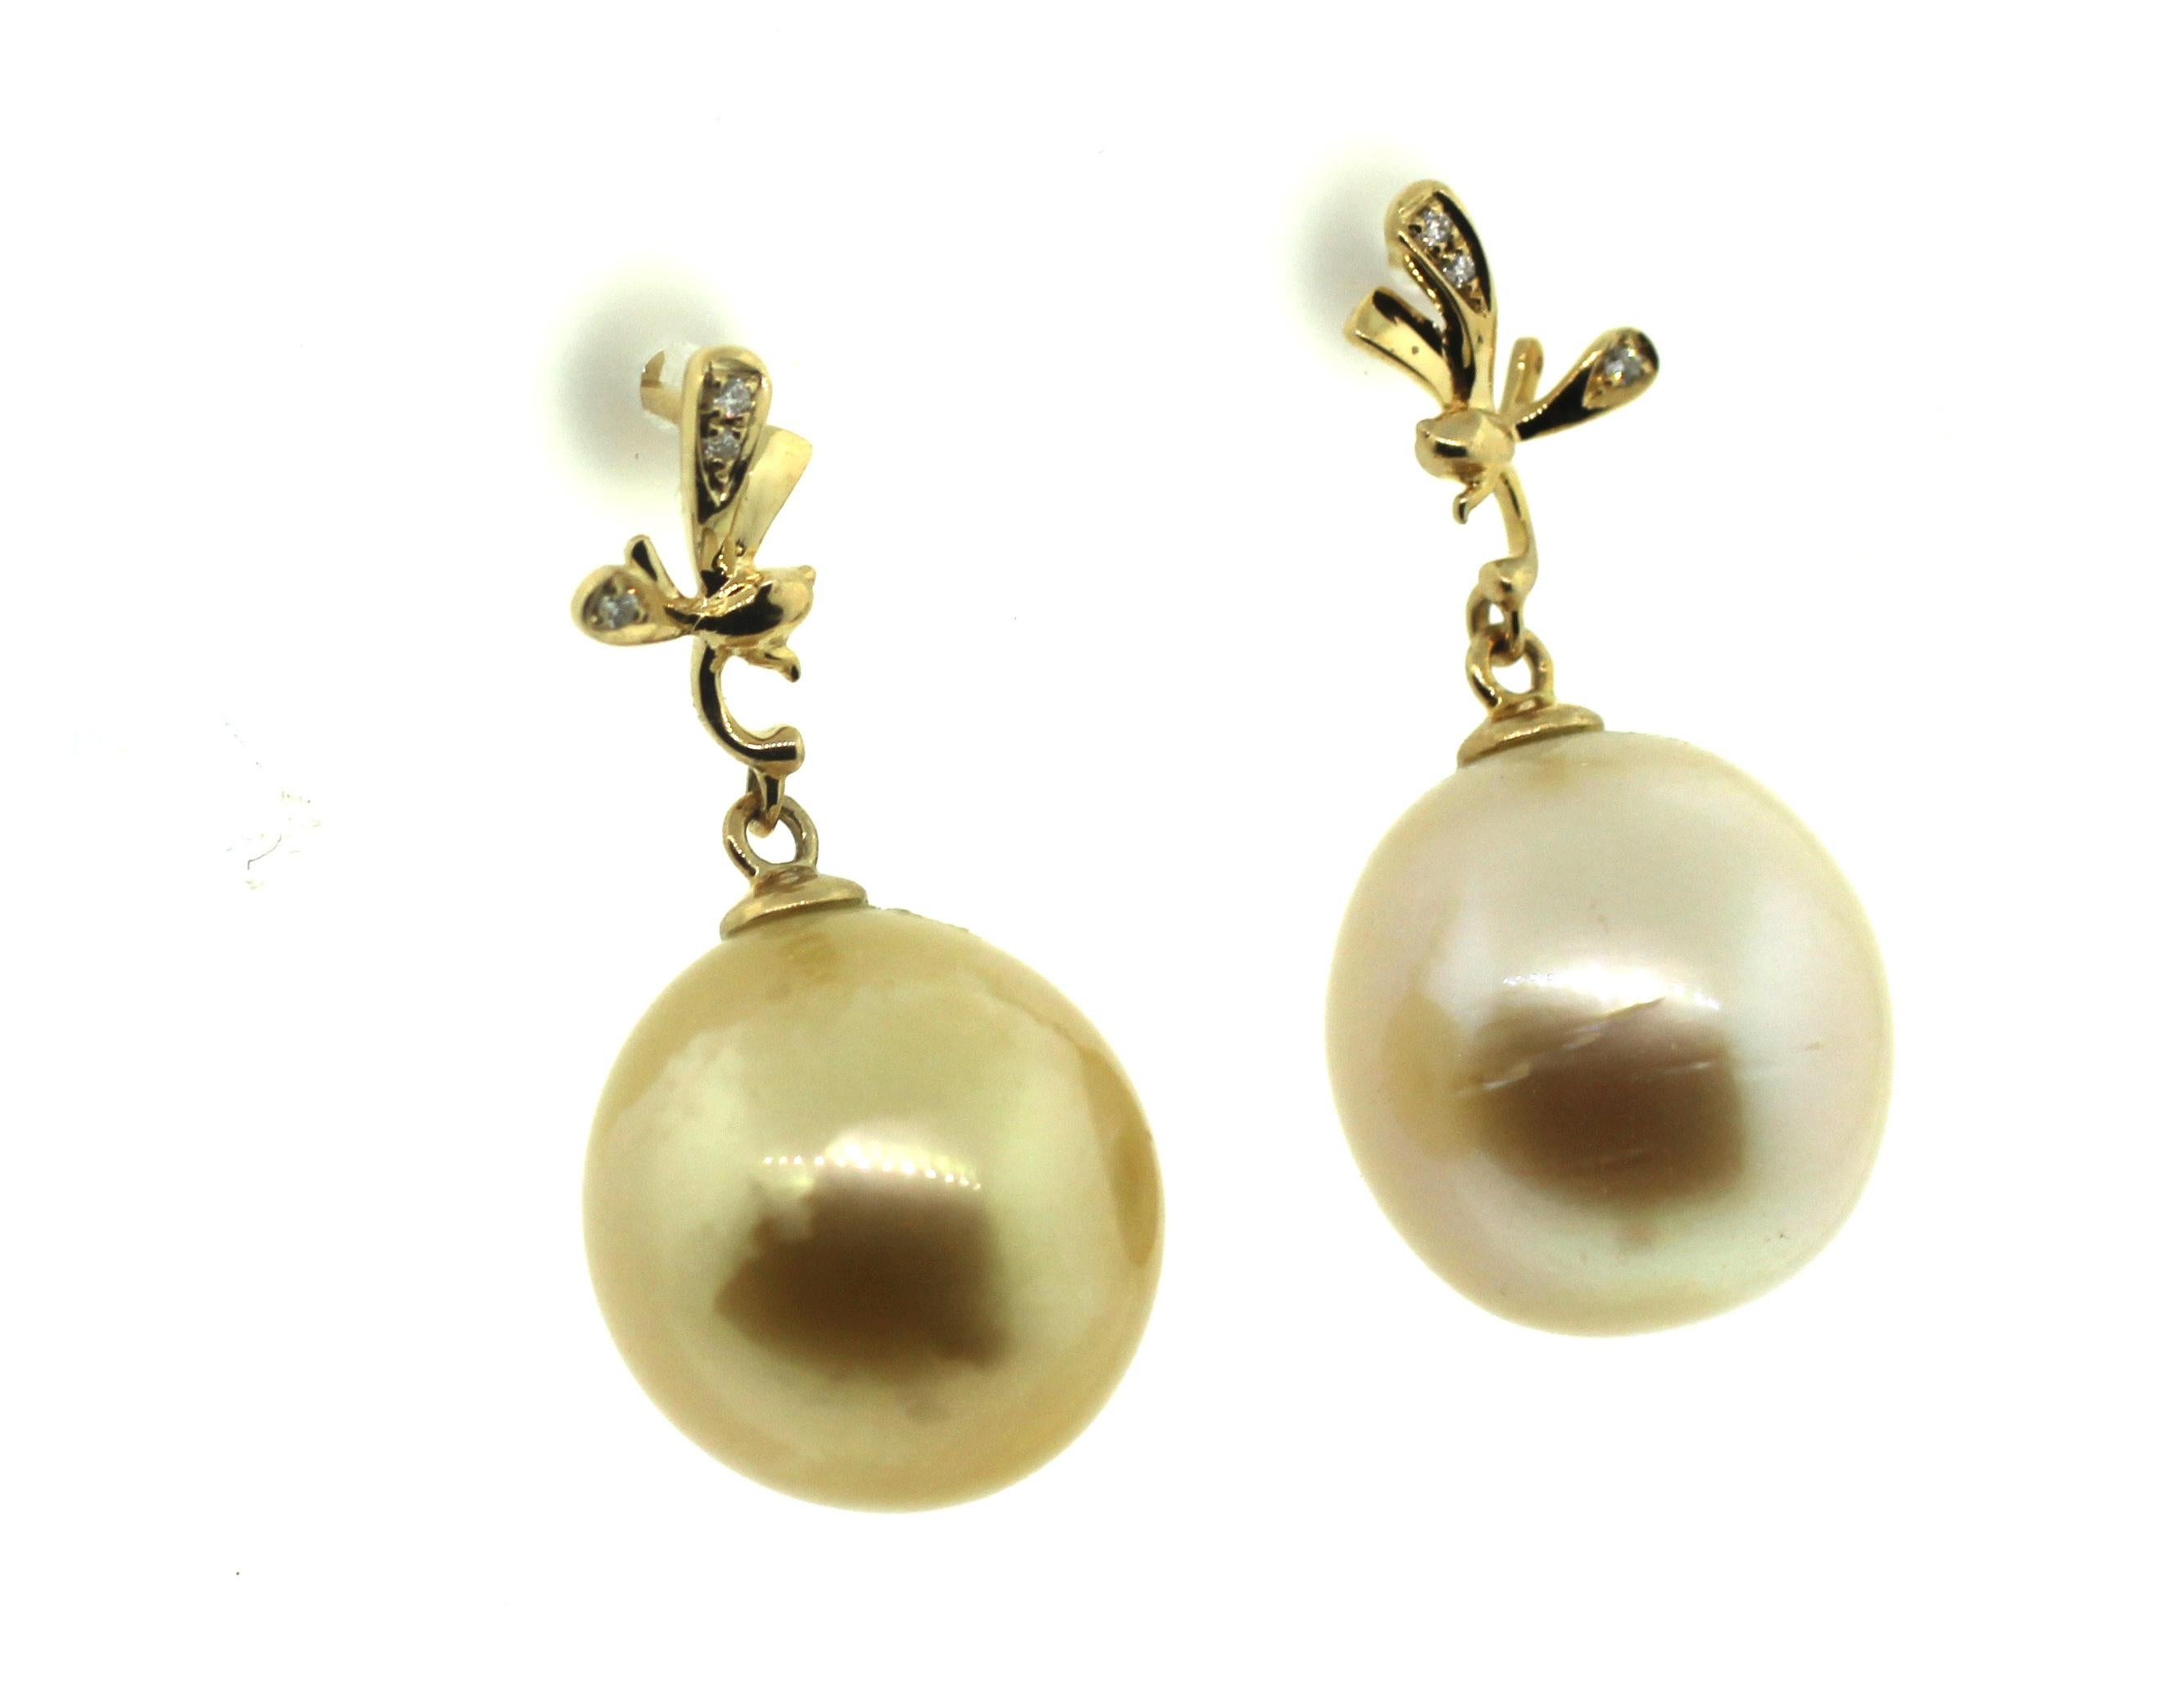 Hakimoto By Jewel Of Ocean
18K Yellow Gold and Diamond 
South Sea Cultured Pearl Earrings.
Total item weight 7.1 grams
Featuring Round Brilliant Diamonds
12-13mm South Sea Drop Cultured Pearls
18K Yellow Gold High Polish
Orient: Very Good
Luster: